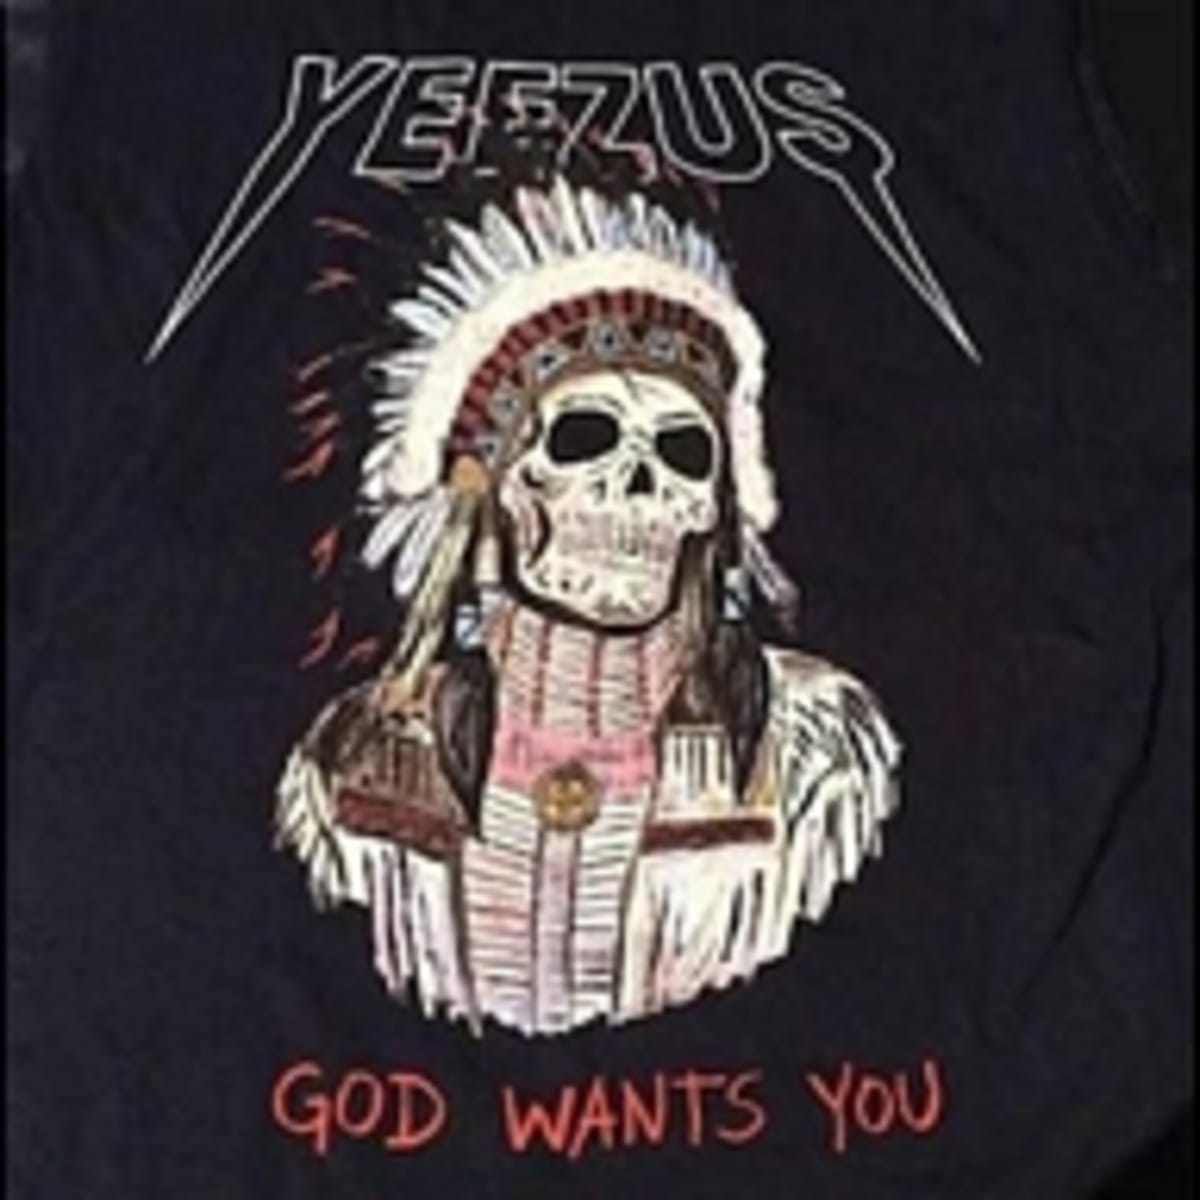 Kanye's Yeezus Tour Merch Features Confederate Flags, Native American  Headdresses